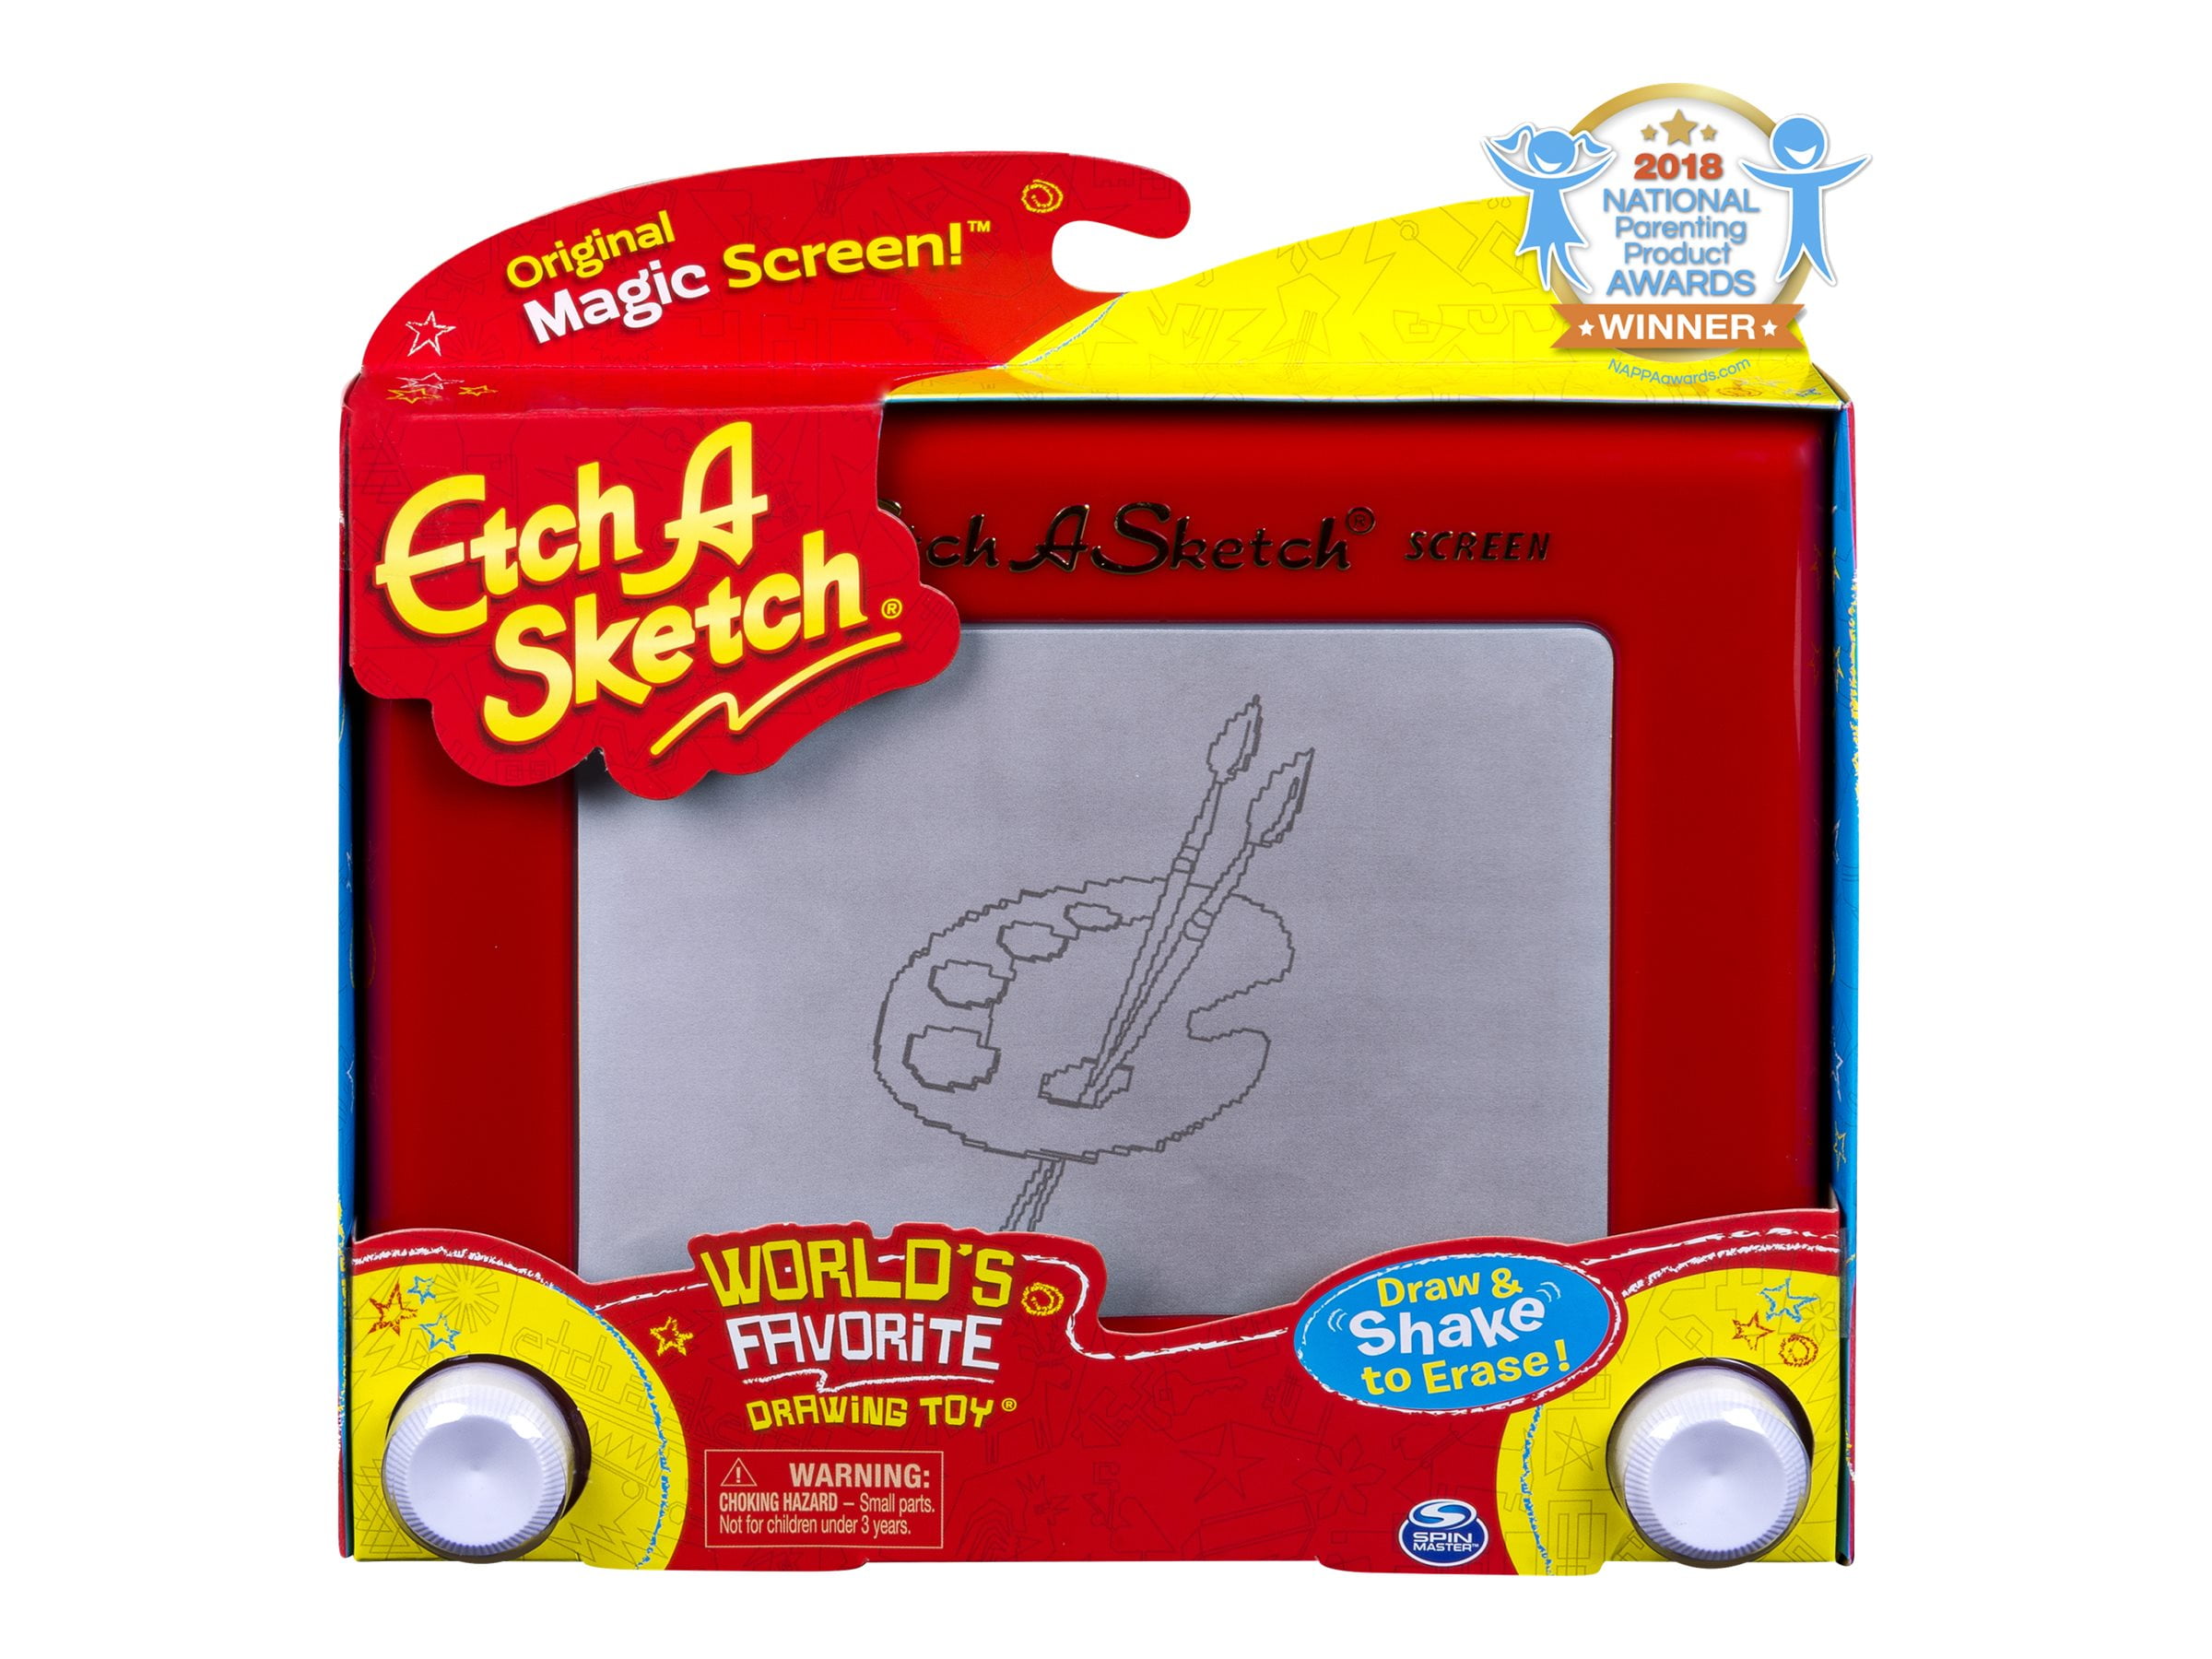 60th Anniversary Diamond Edition with Magic Screen Etch A Sketch Classic for Ages 3 and Up